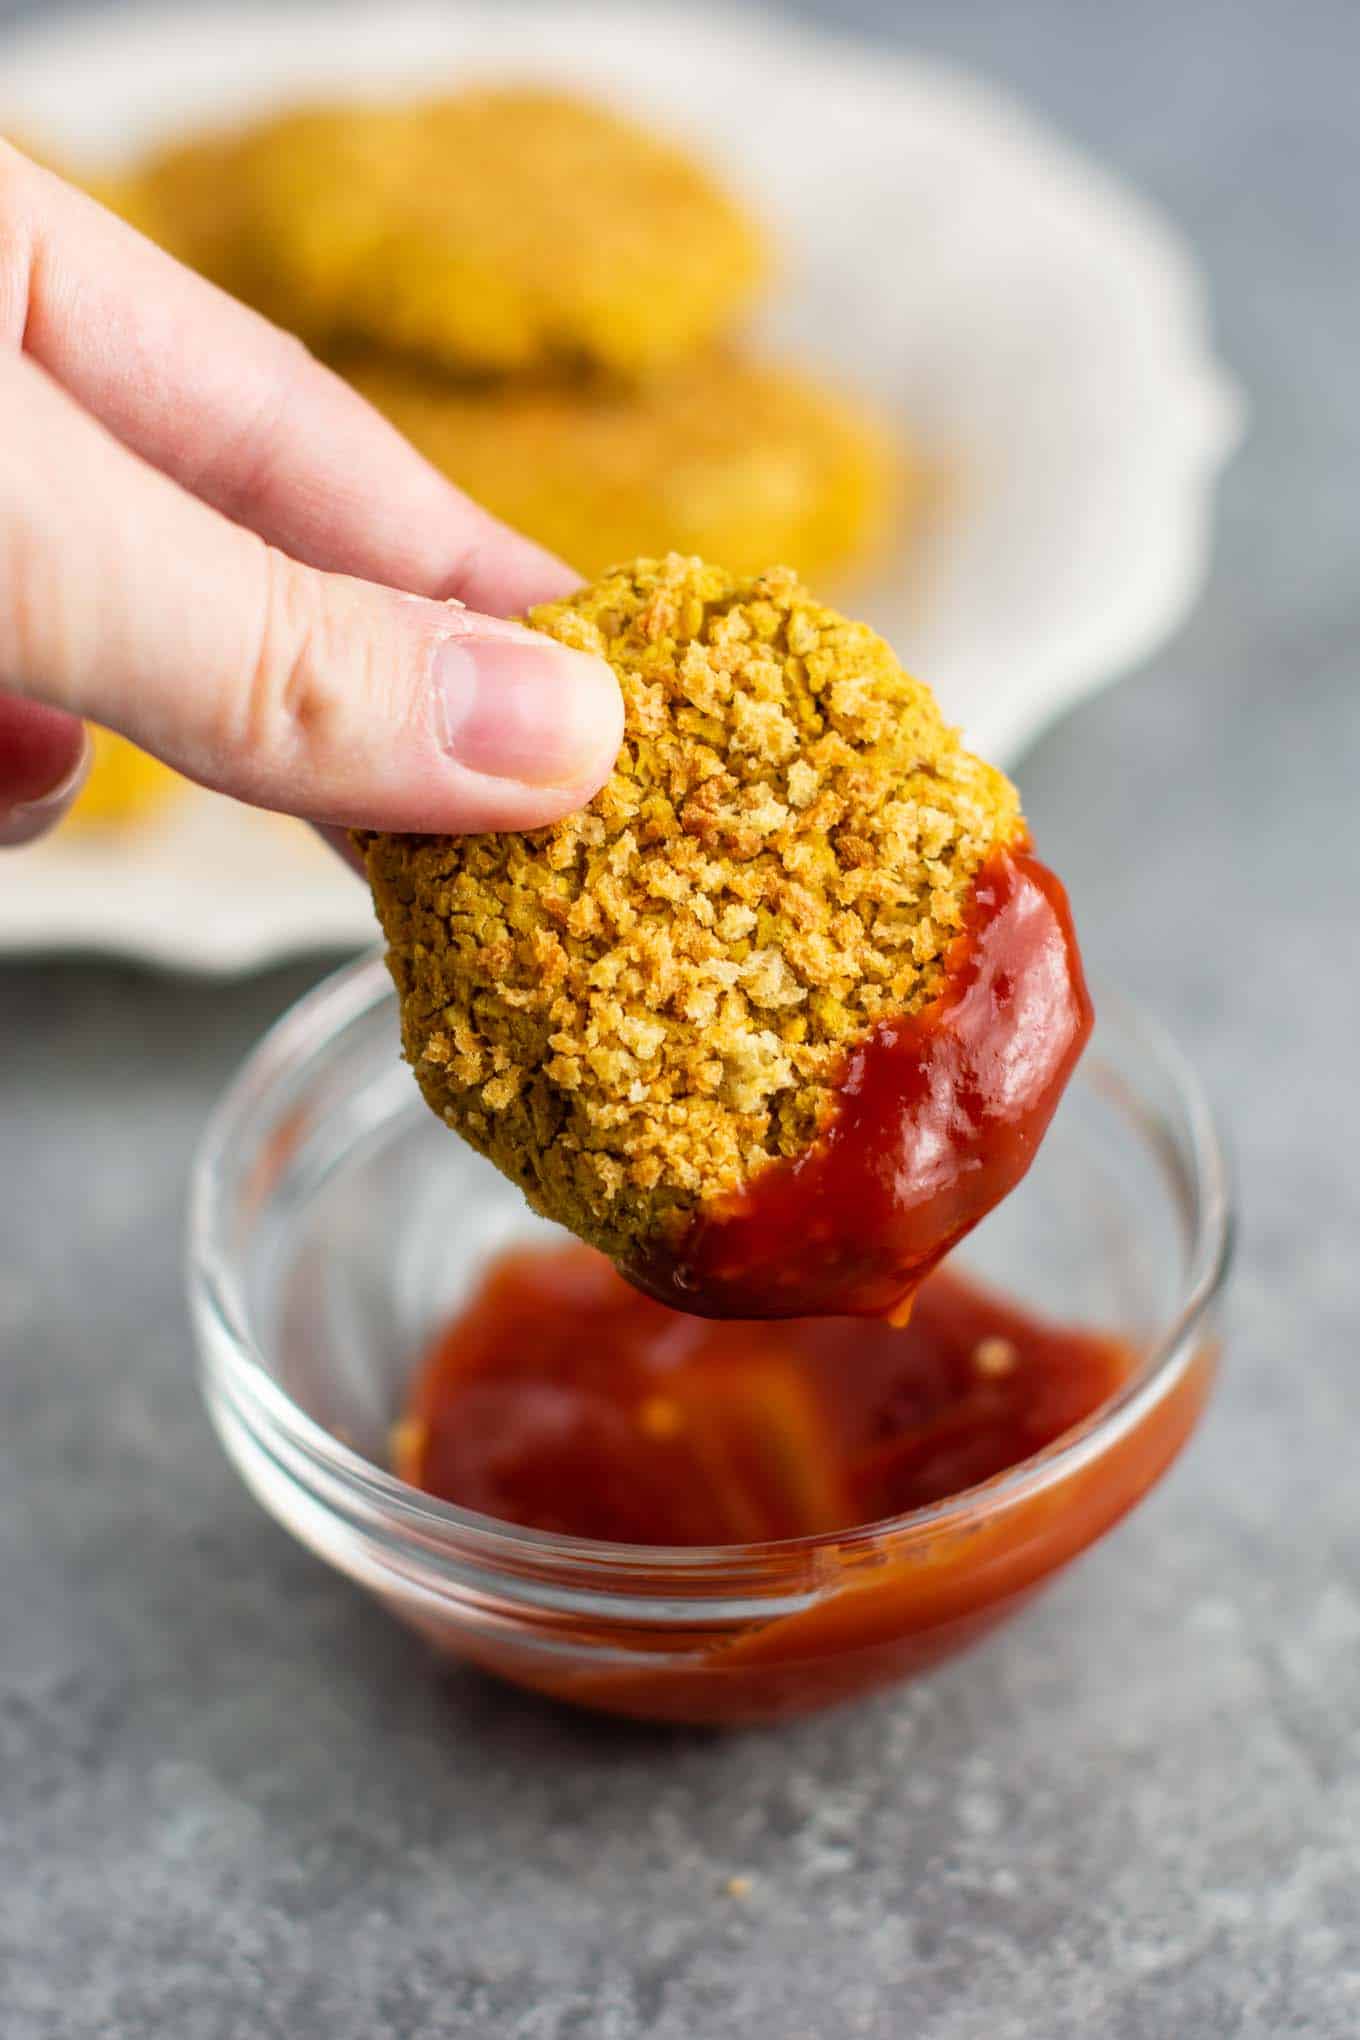 Chickpea nuggets – meatless chicken nugget recipe. #chickpeanuggets #vegetarian #meatless #chicknnuggets 